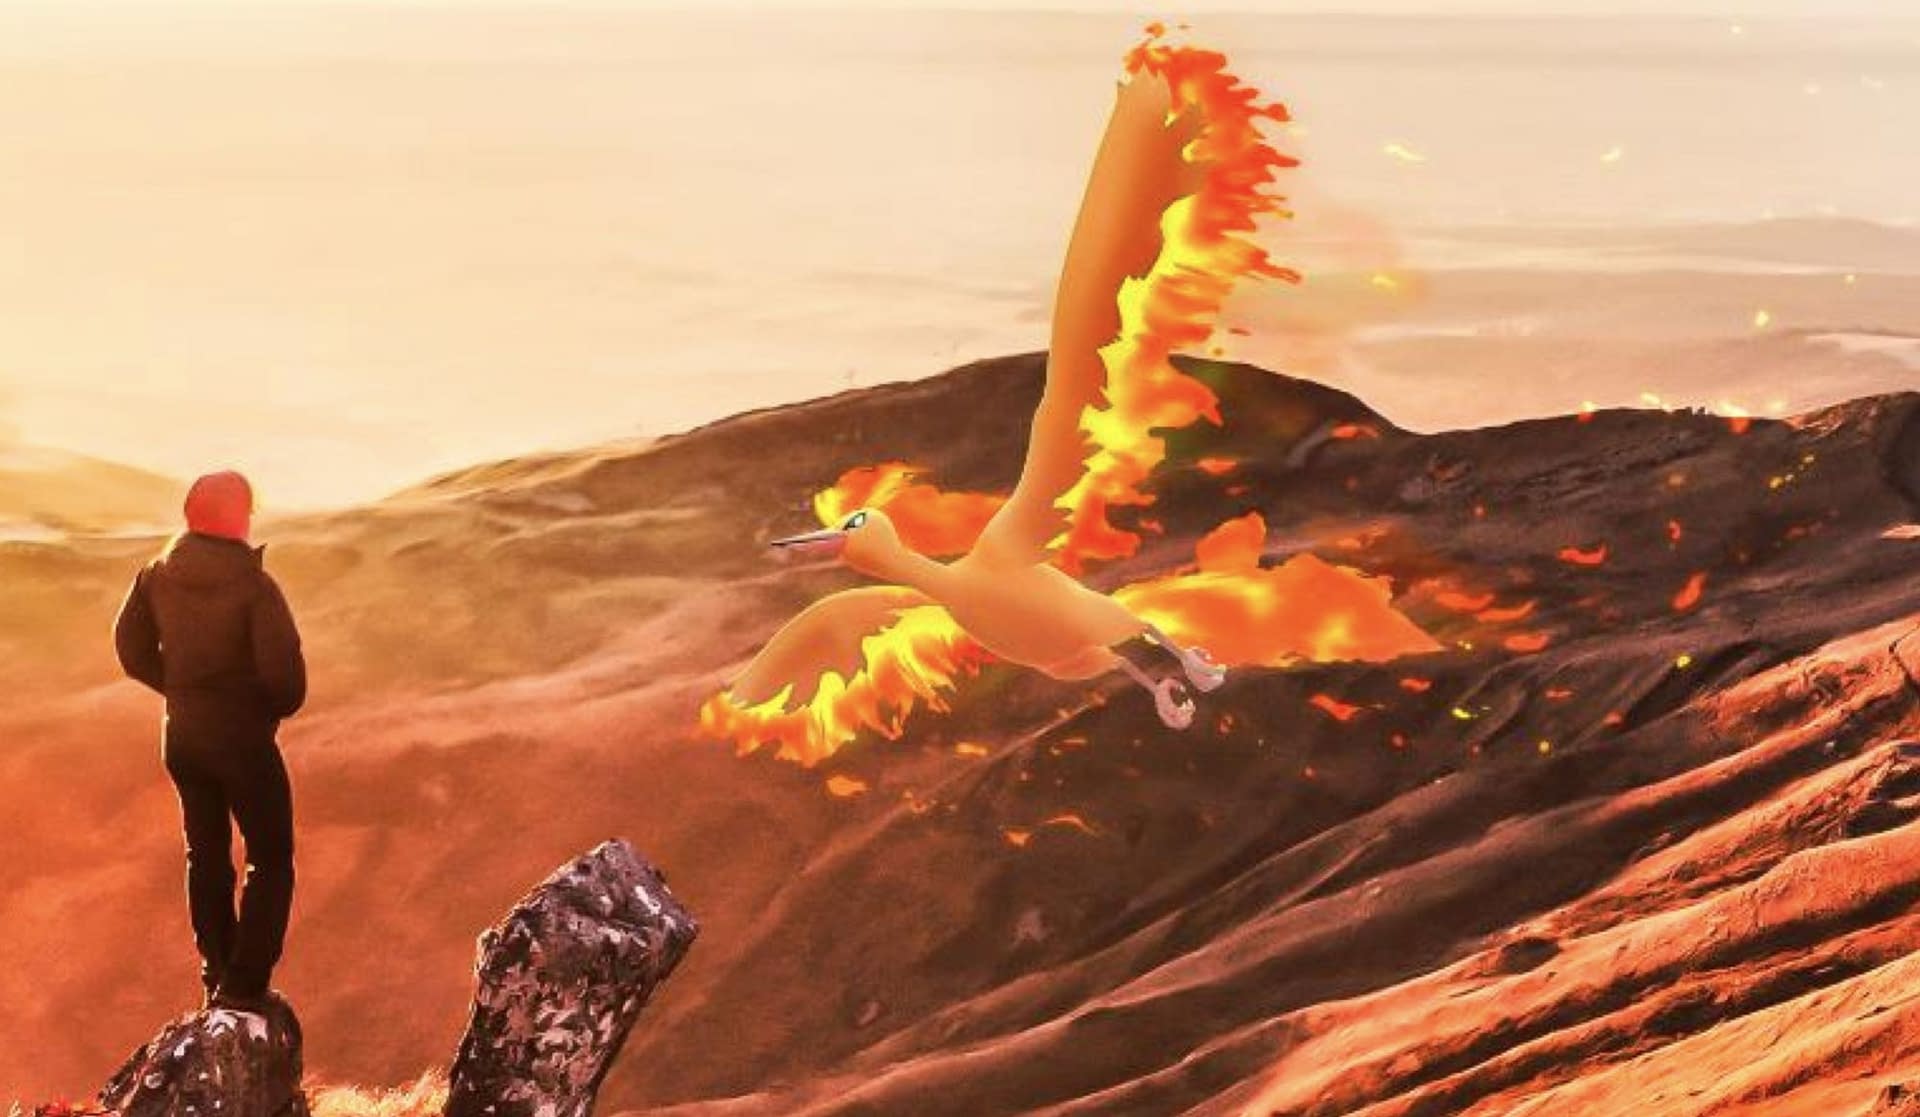 How Many Trainers Do you Need to Defeat Moltres in Pokemon Go?